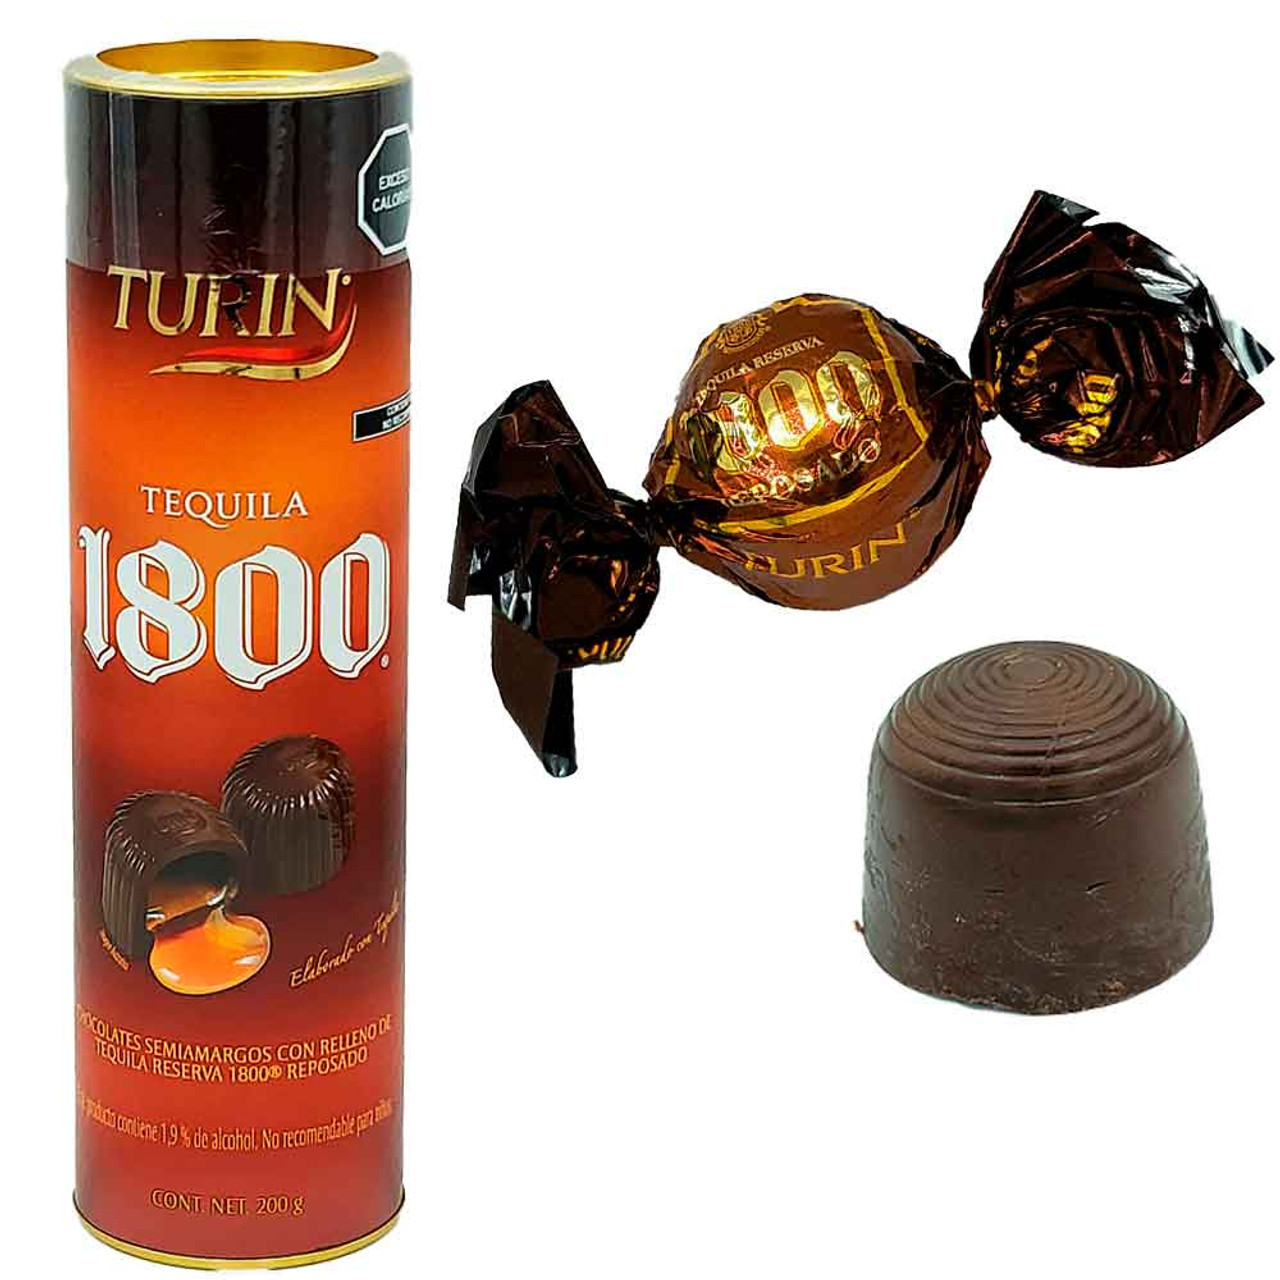 Turin Chocolate 1800 is a delicious semi bitter chocolate with a really tasty liquid caramel filling of a 1800 reserve tequila reposado. A delightful combination between the sweetness and bitterness of a chocolate and the delicious heat of tequila.